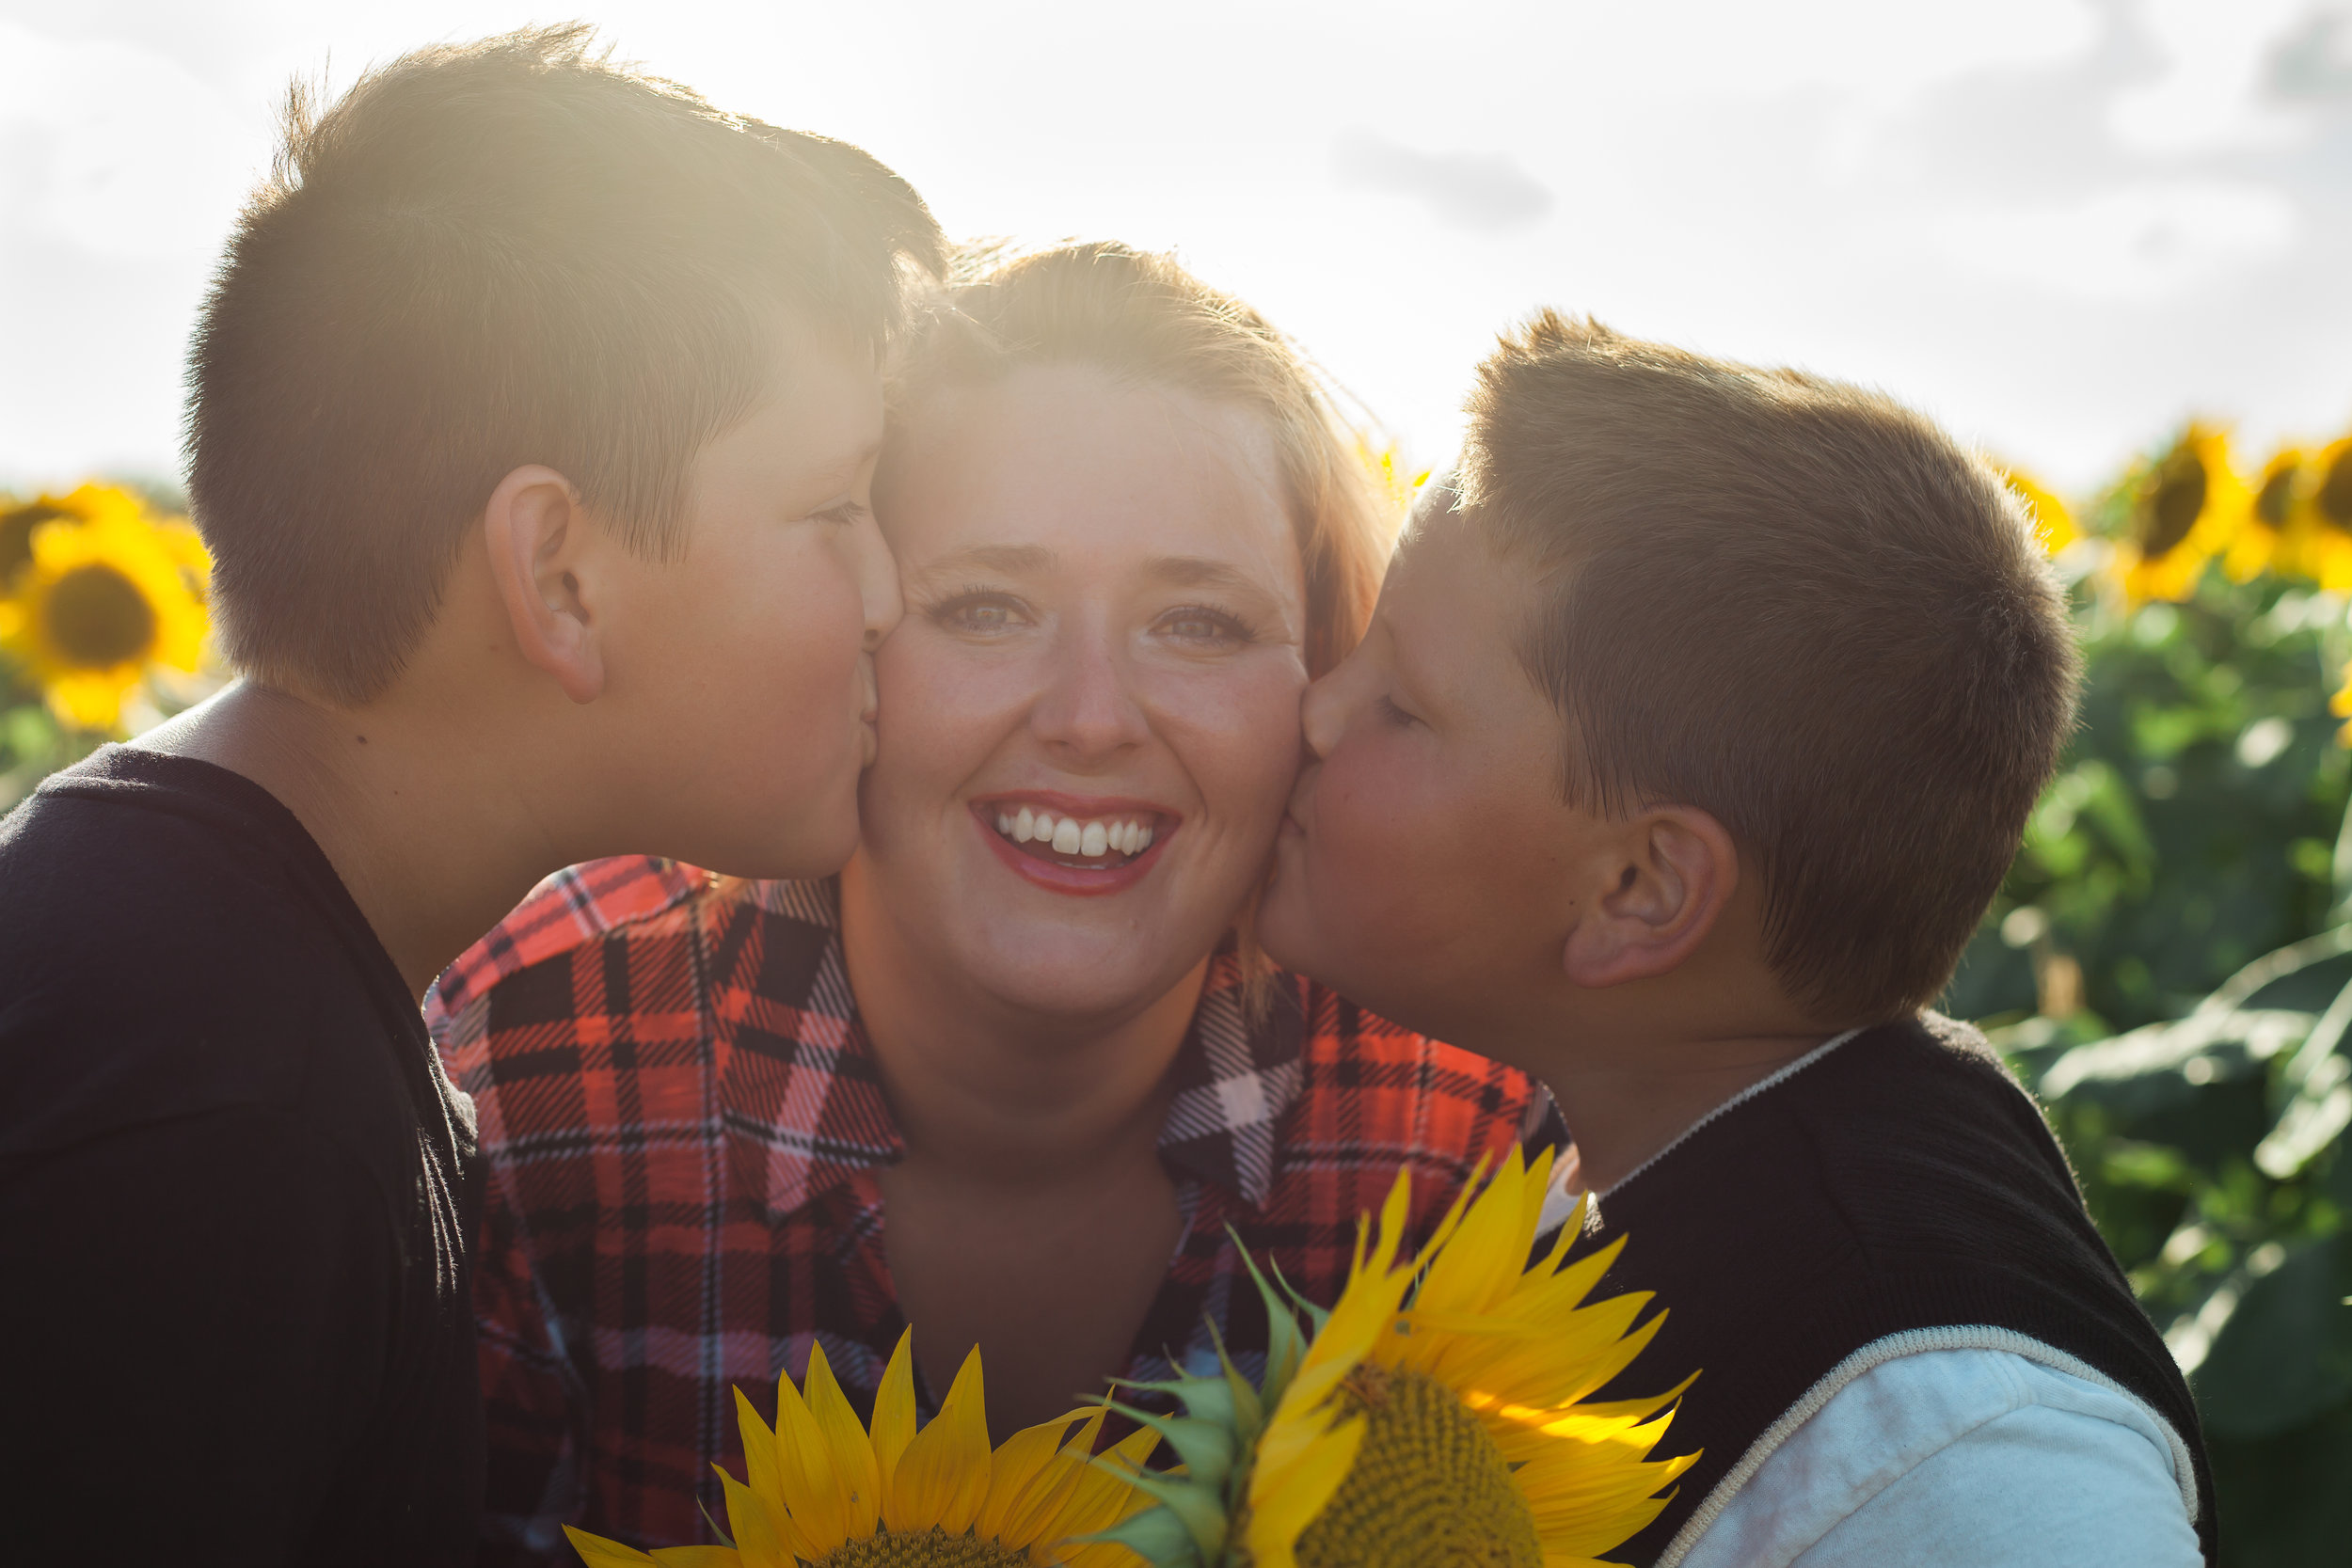 Kansas City Family Photography at Grinter's Sunflower Field by Merry Ohler